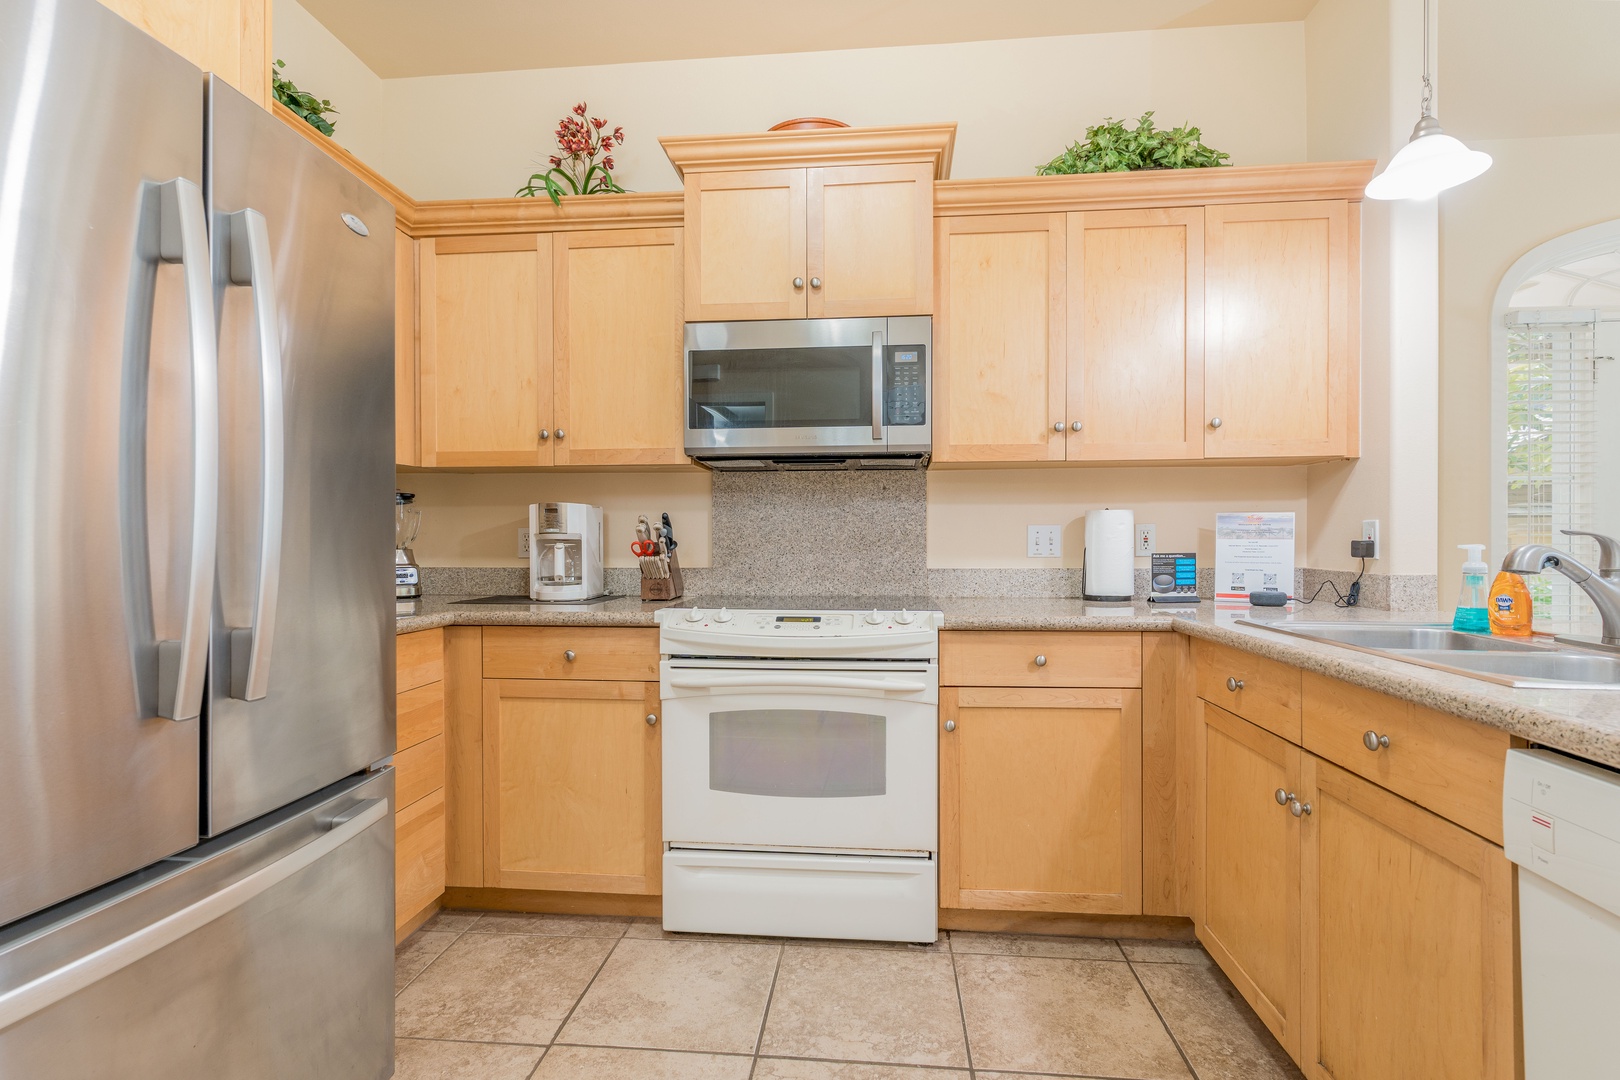 Kapolei Vacation Rentals, Kai Lani 8B - Gracious amenities for your culinary adventures in the kitchen.